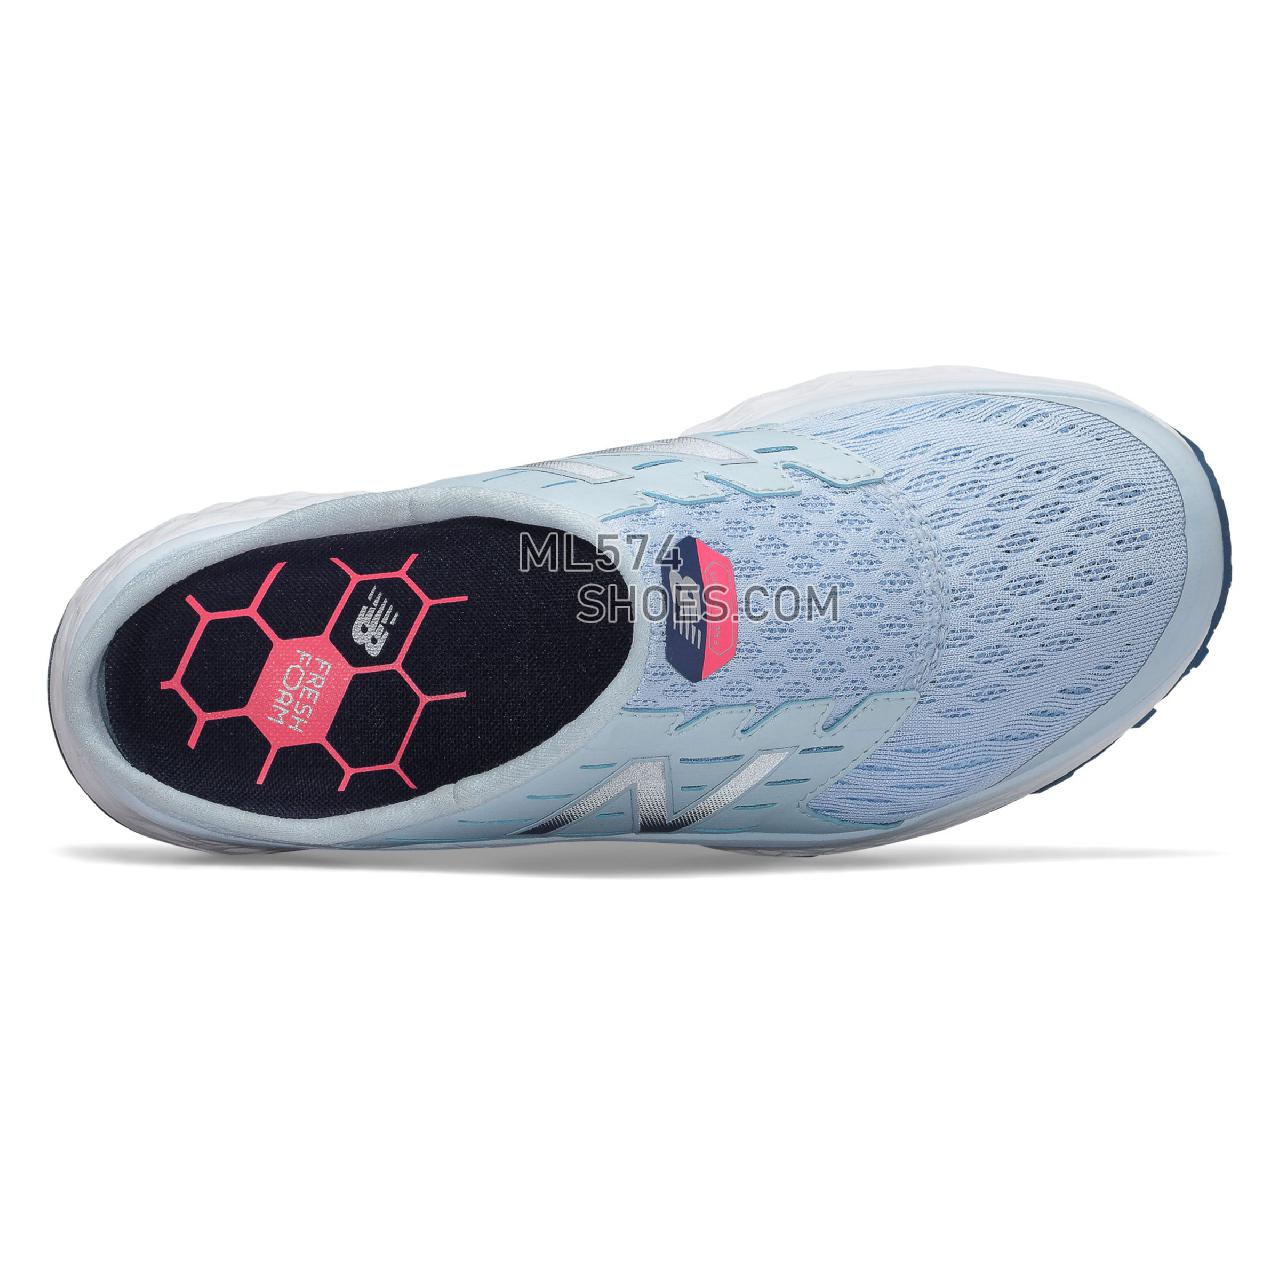 New Balance Sport Slip 900 - Women's Walking - Air with Moroccan Tile and Guava - WA900CA